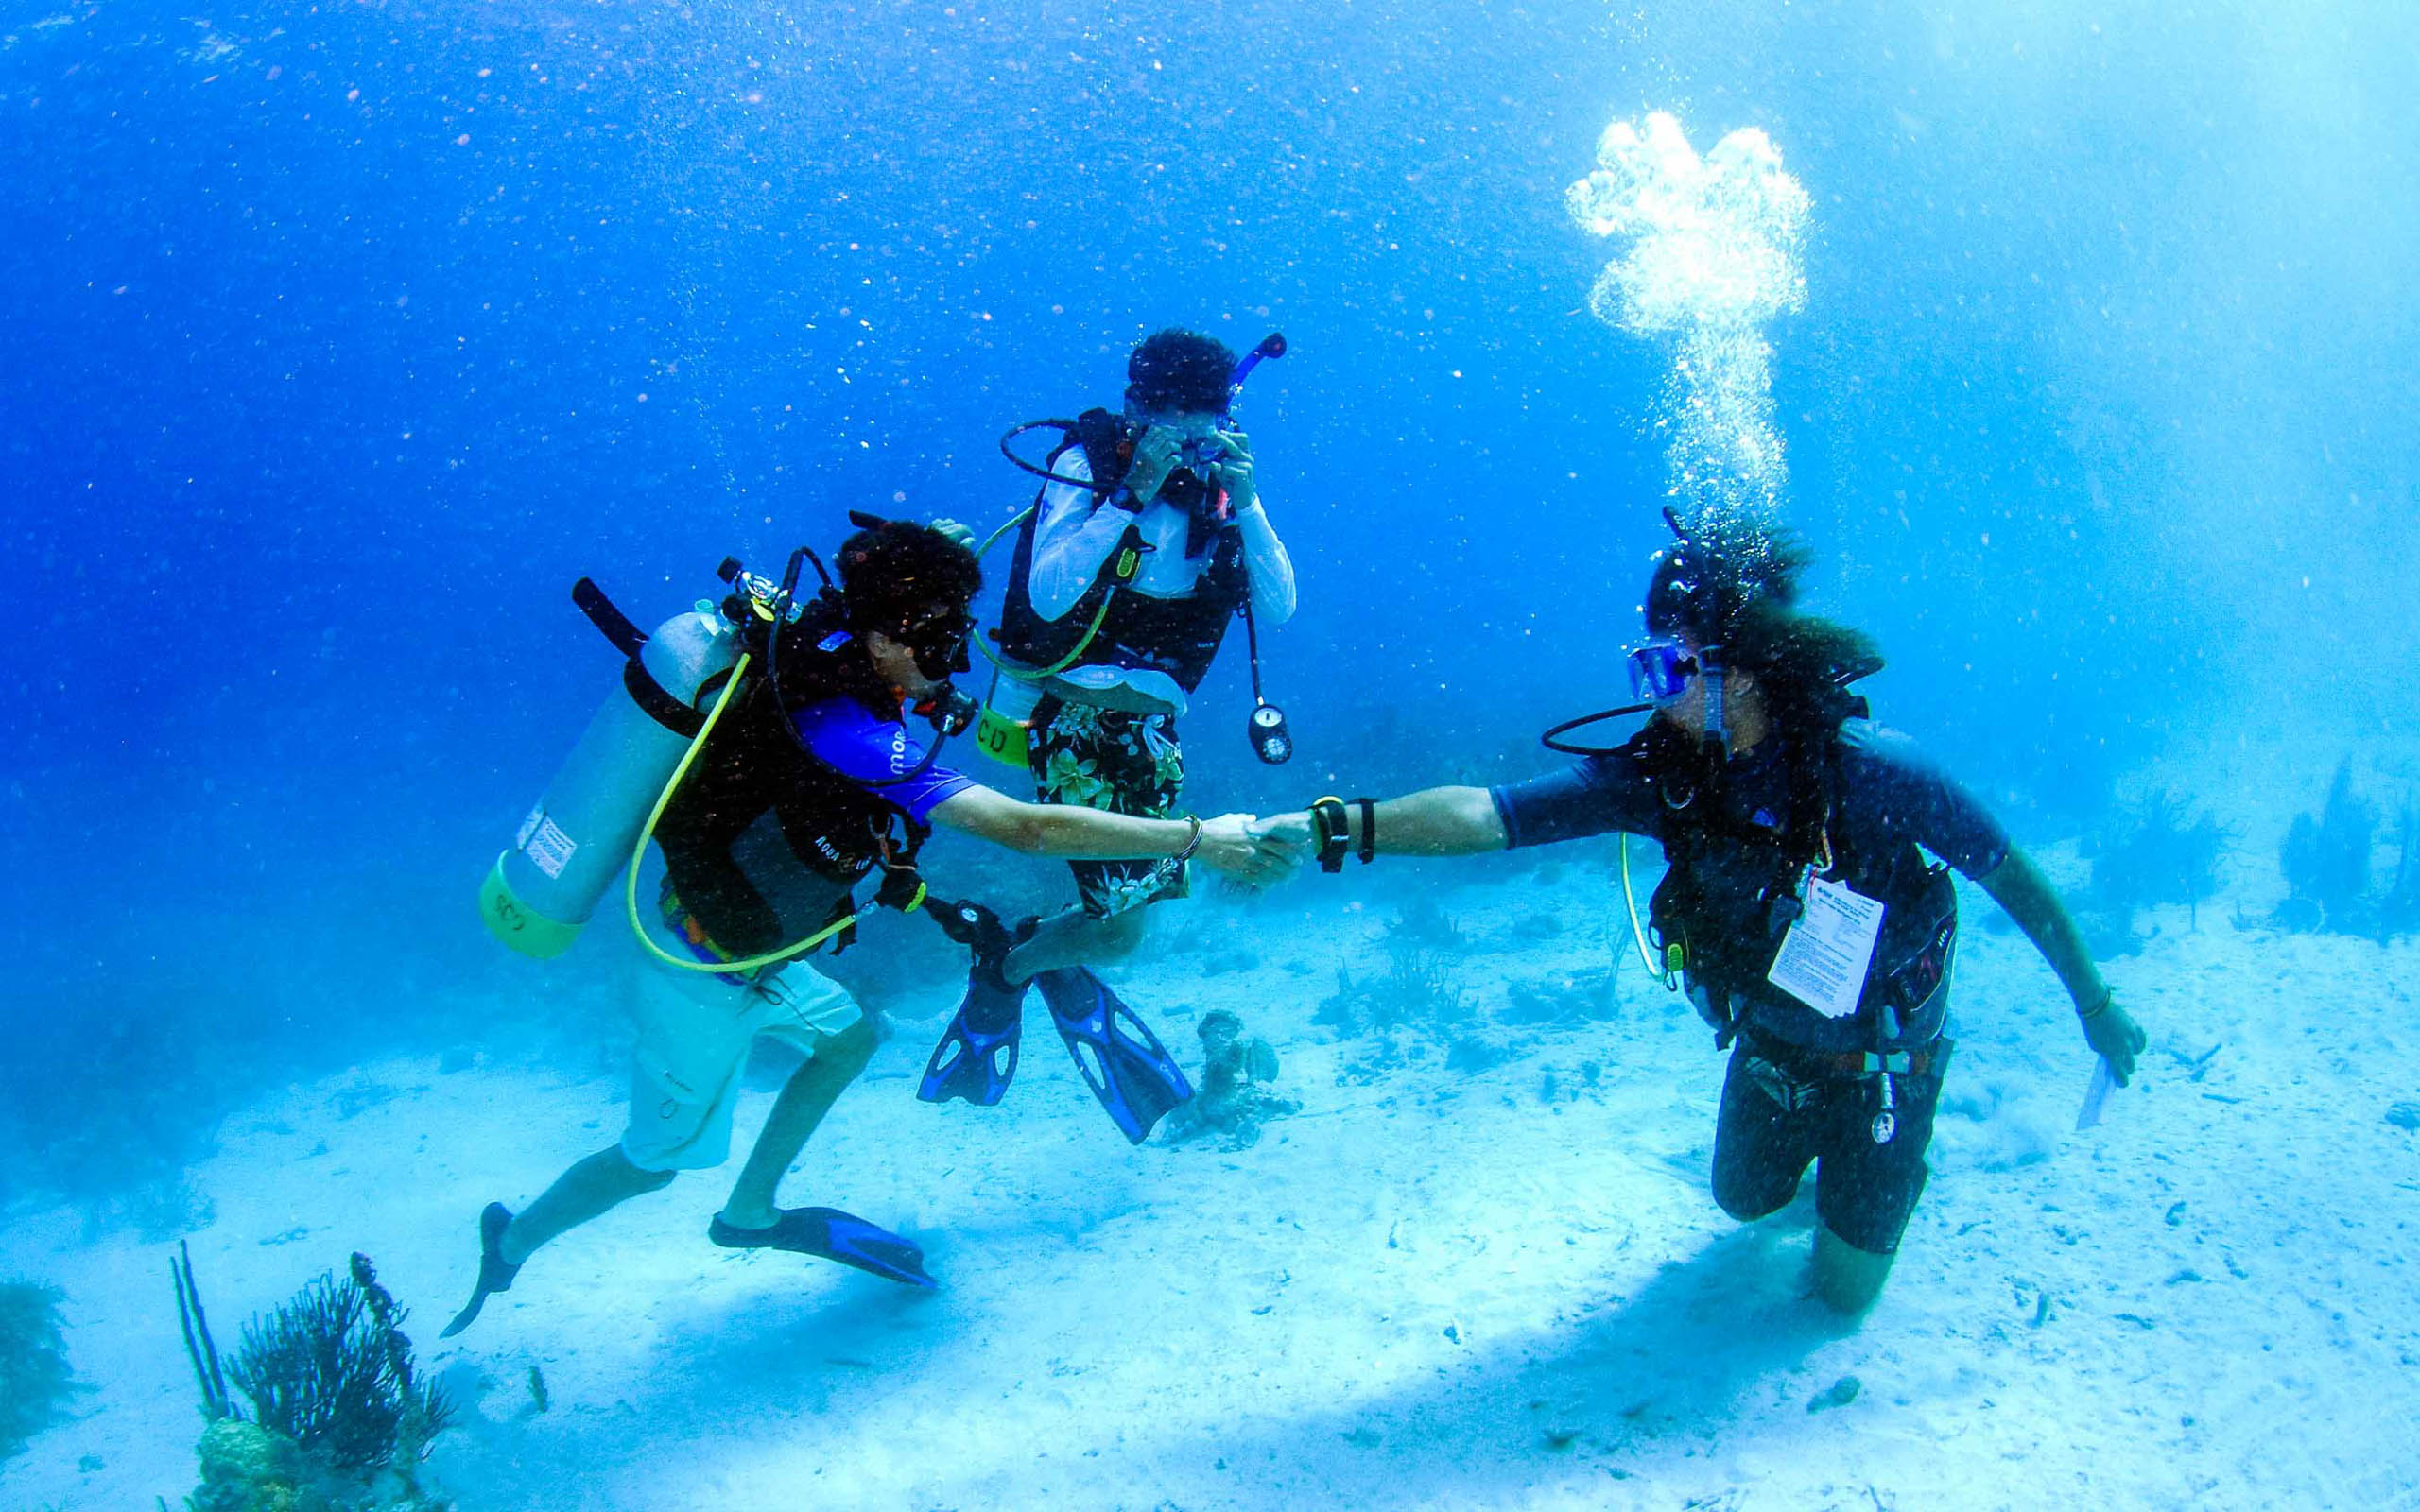 A group of people scuba diving in the ocean.